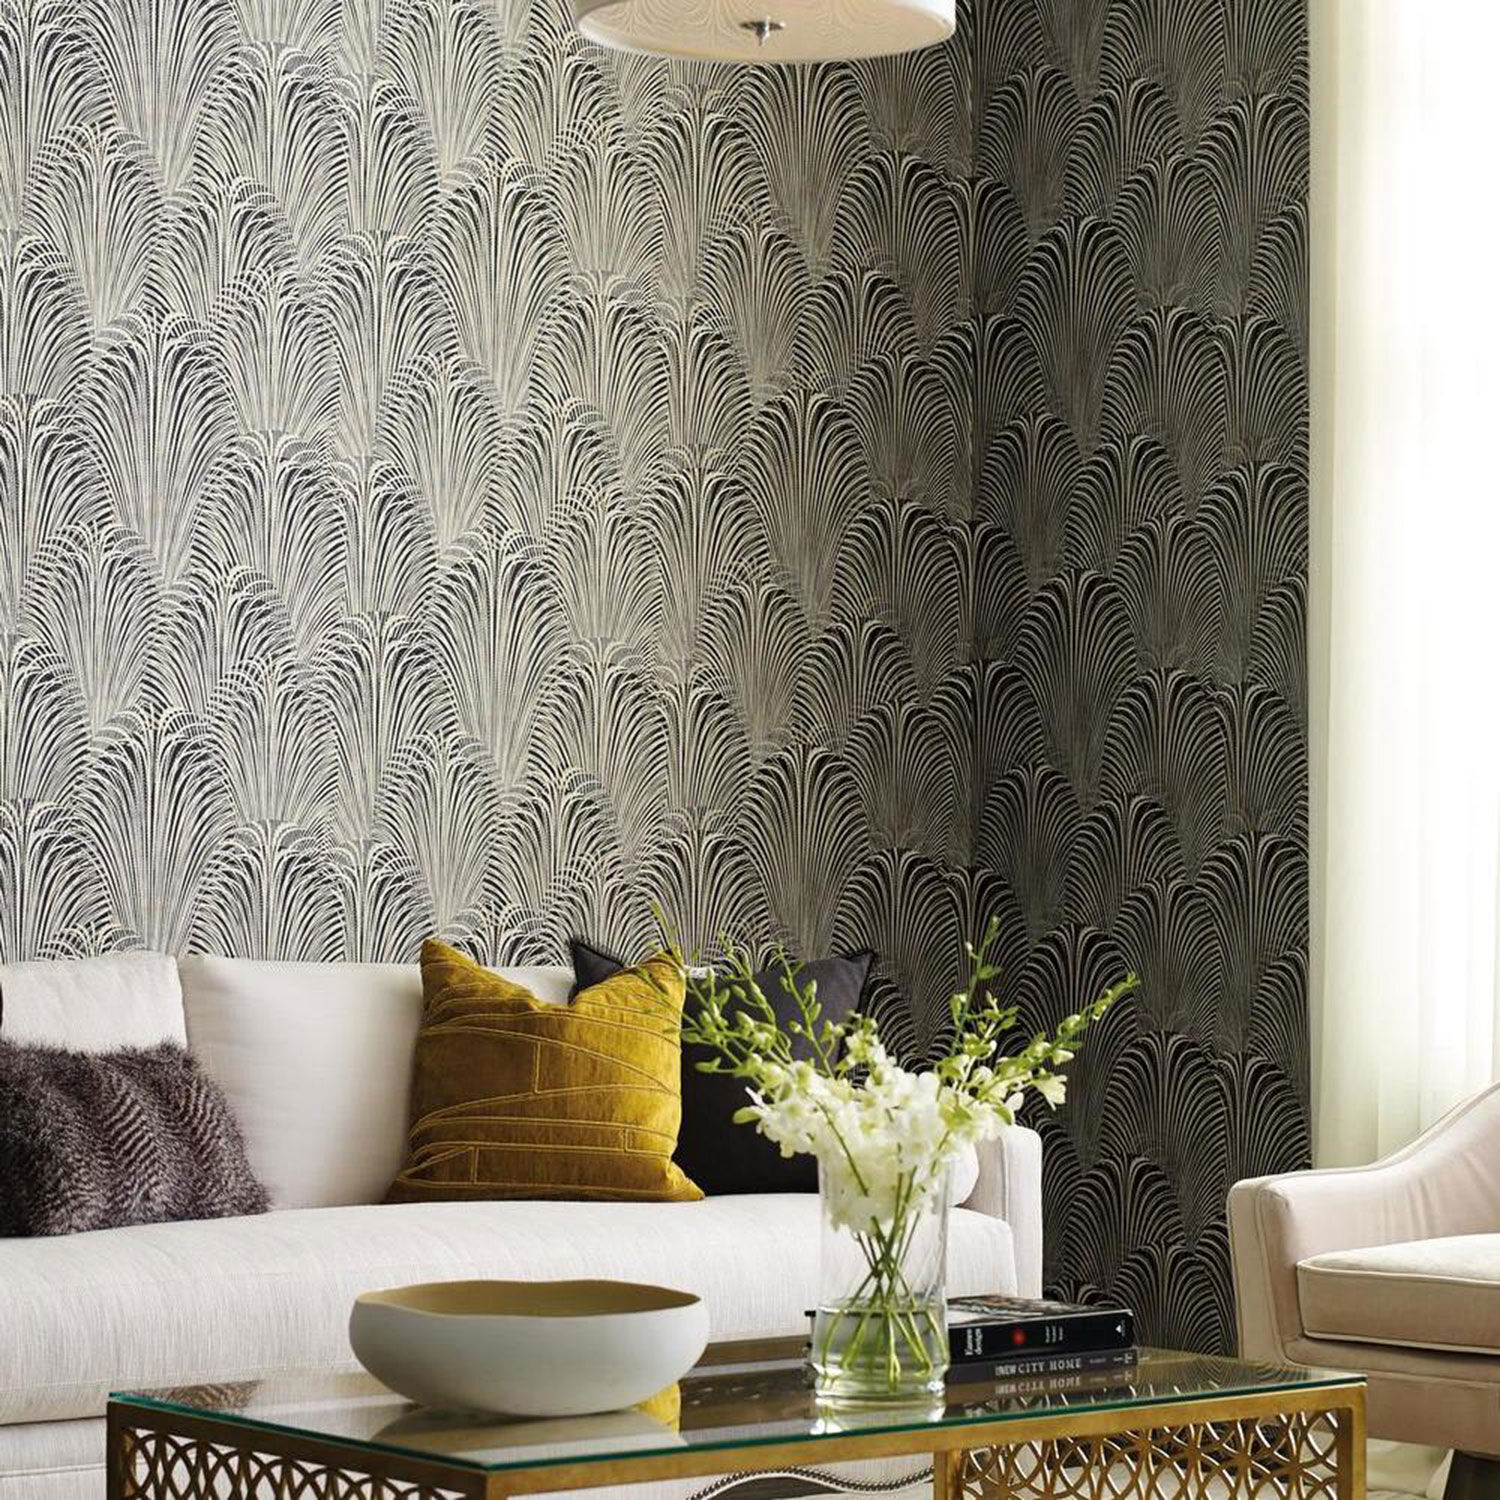 Nature Inspires Candice Olsons Dreamy Wallpapers  Designs